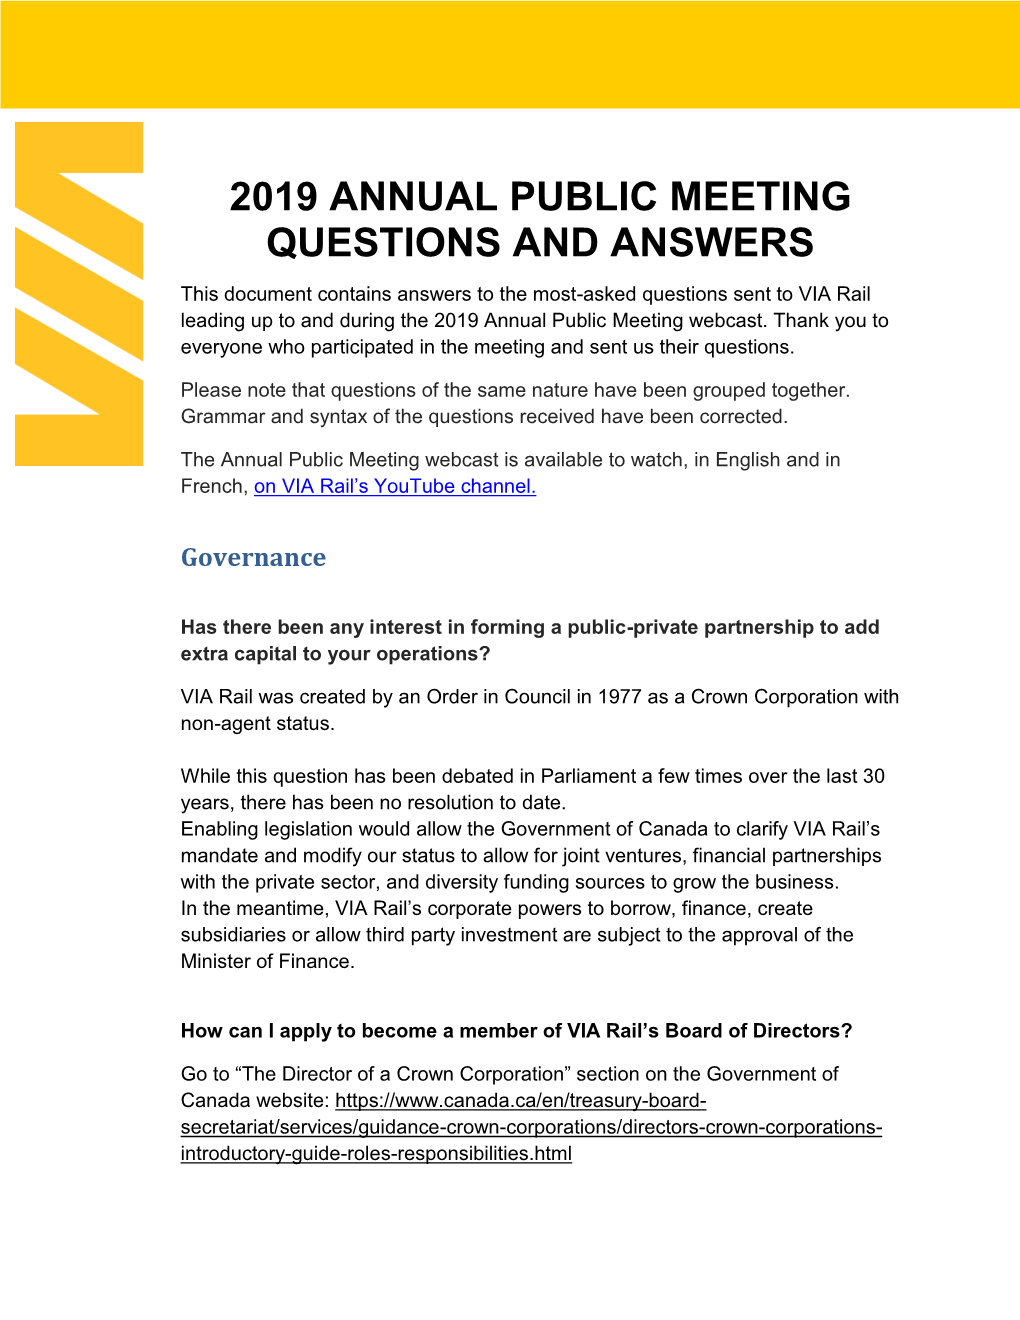 2019 Annual Public Meeting Questions and Answers